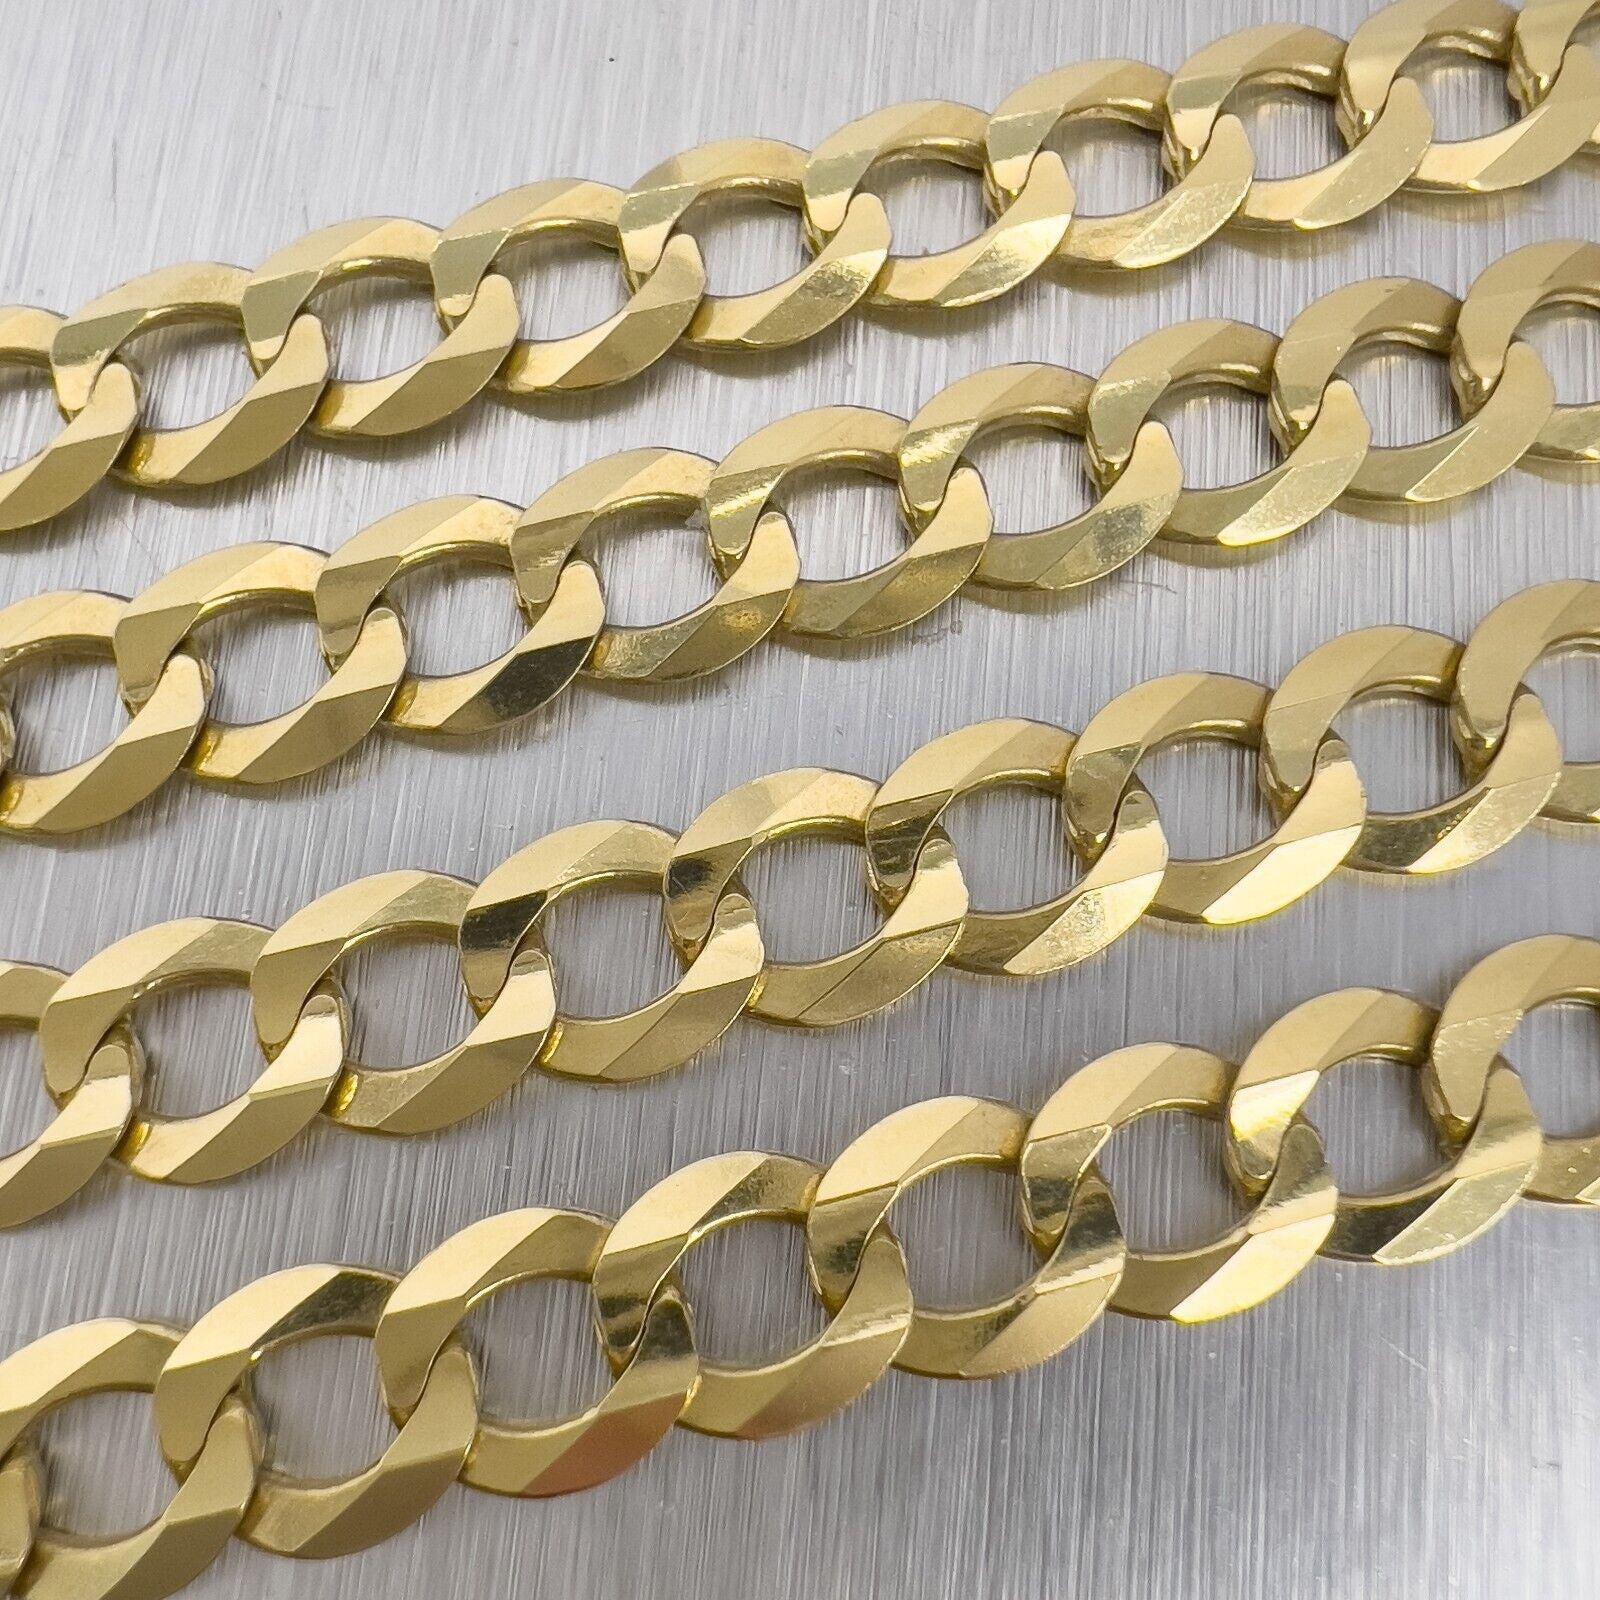 14k Yellow Gold Flat Cuban Curb Link 7.00mm Chain Necklace 26" 31.3g